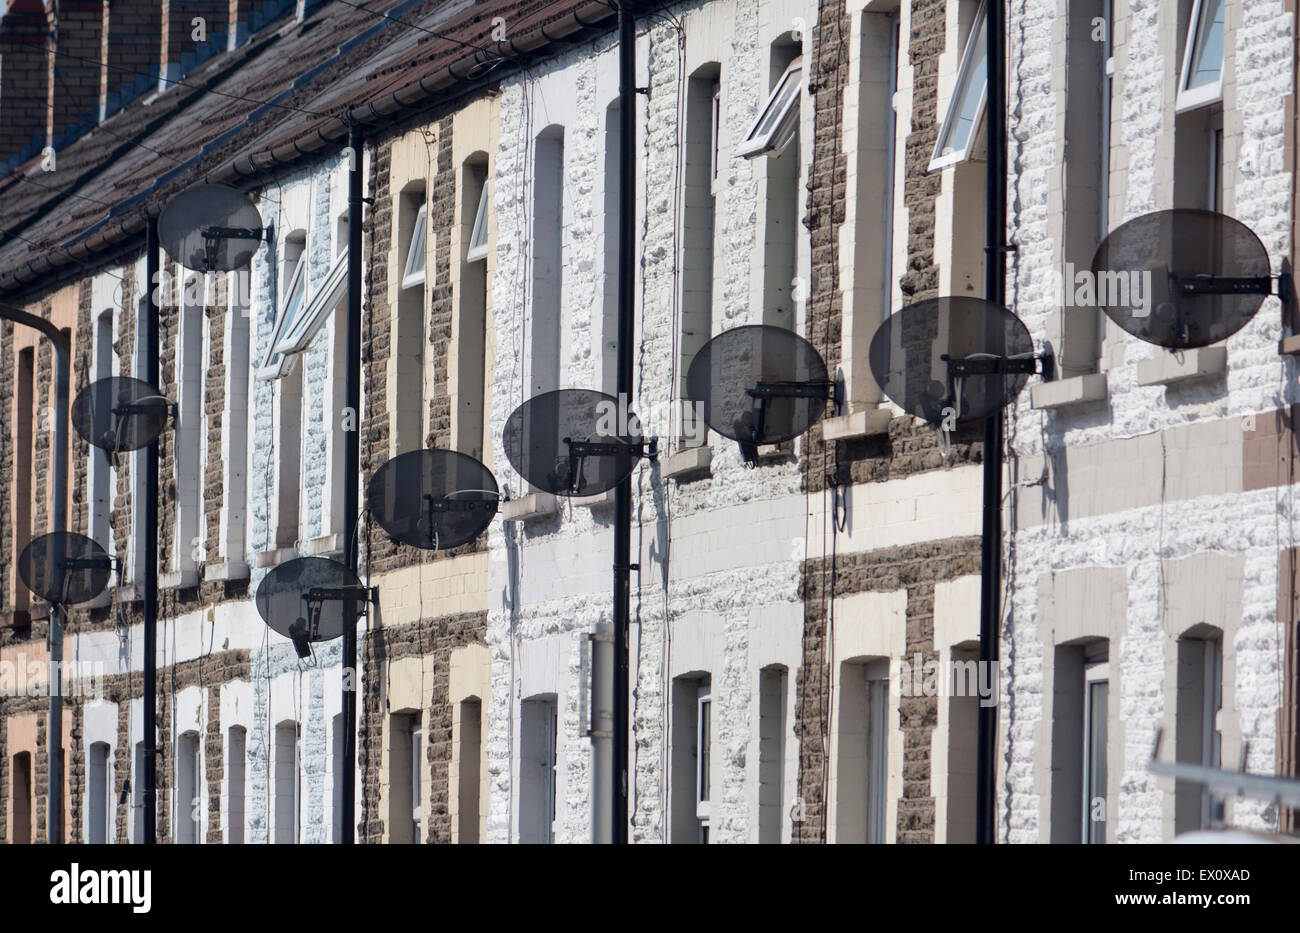 TV satellite dishes on exteriors of terraced houses Cardiff Wales UK Stock Photo